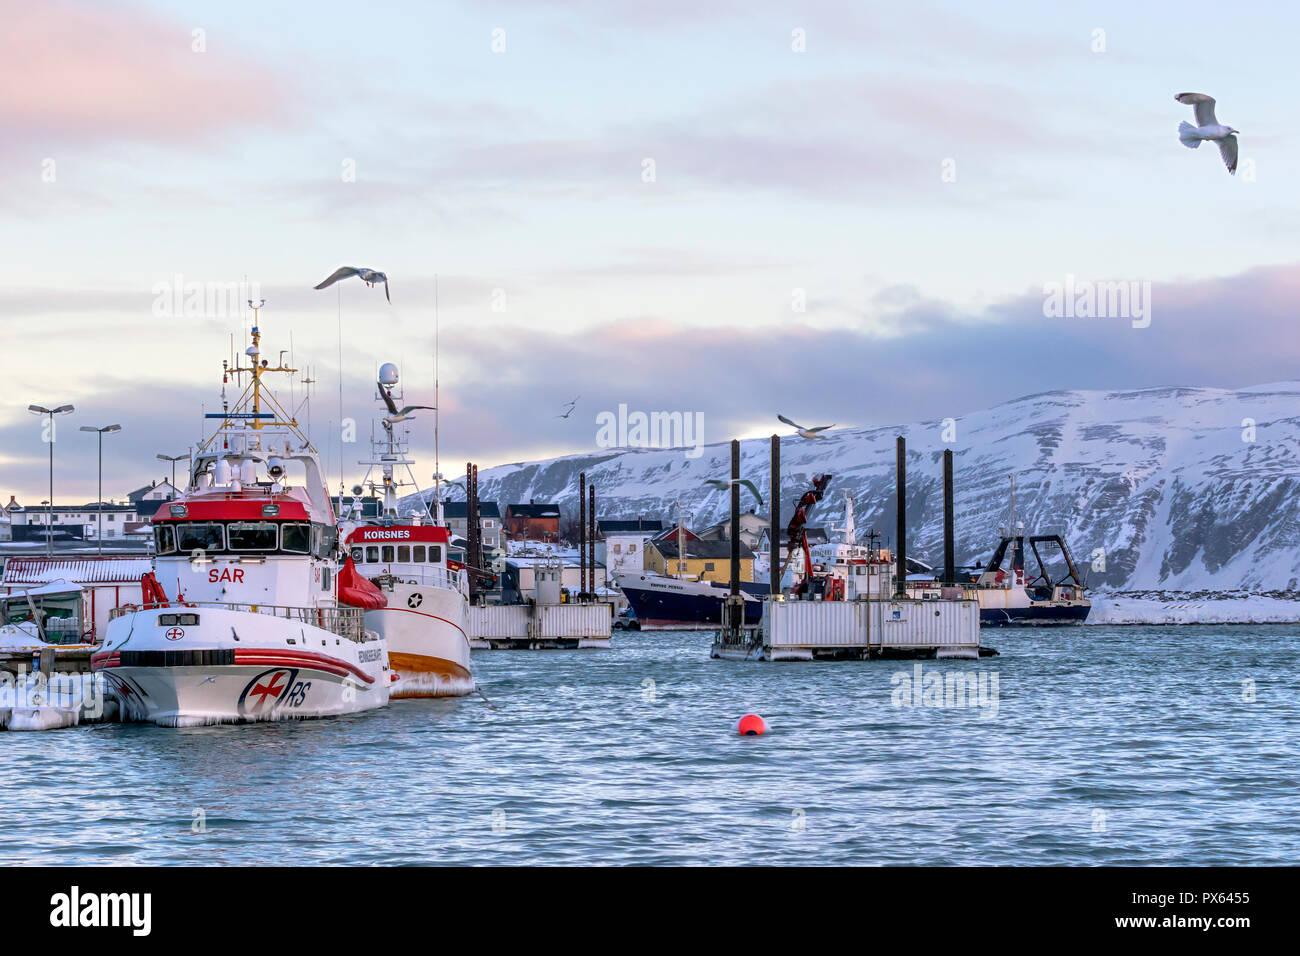 From the small fishing village of Batsfjord, Finnmark county, north Norway. Rescue vessel SAR - RS 110 Reidar von Koss is based there. Stock Photo